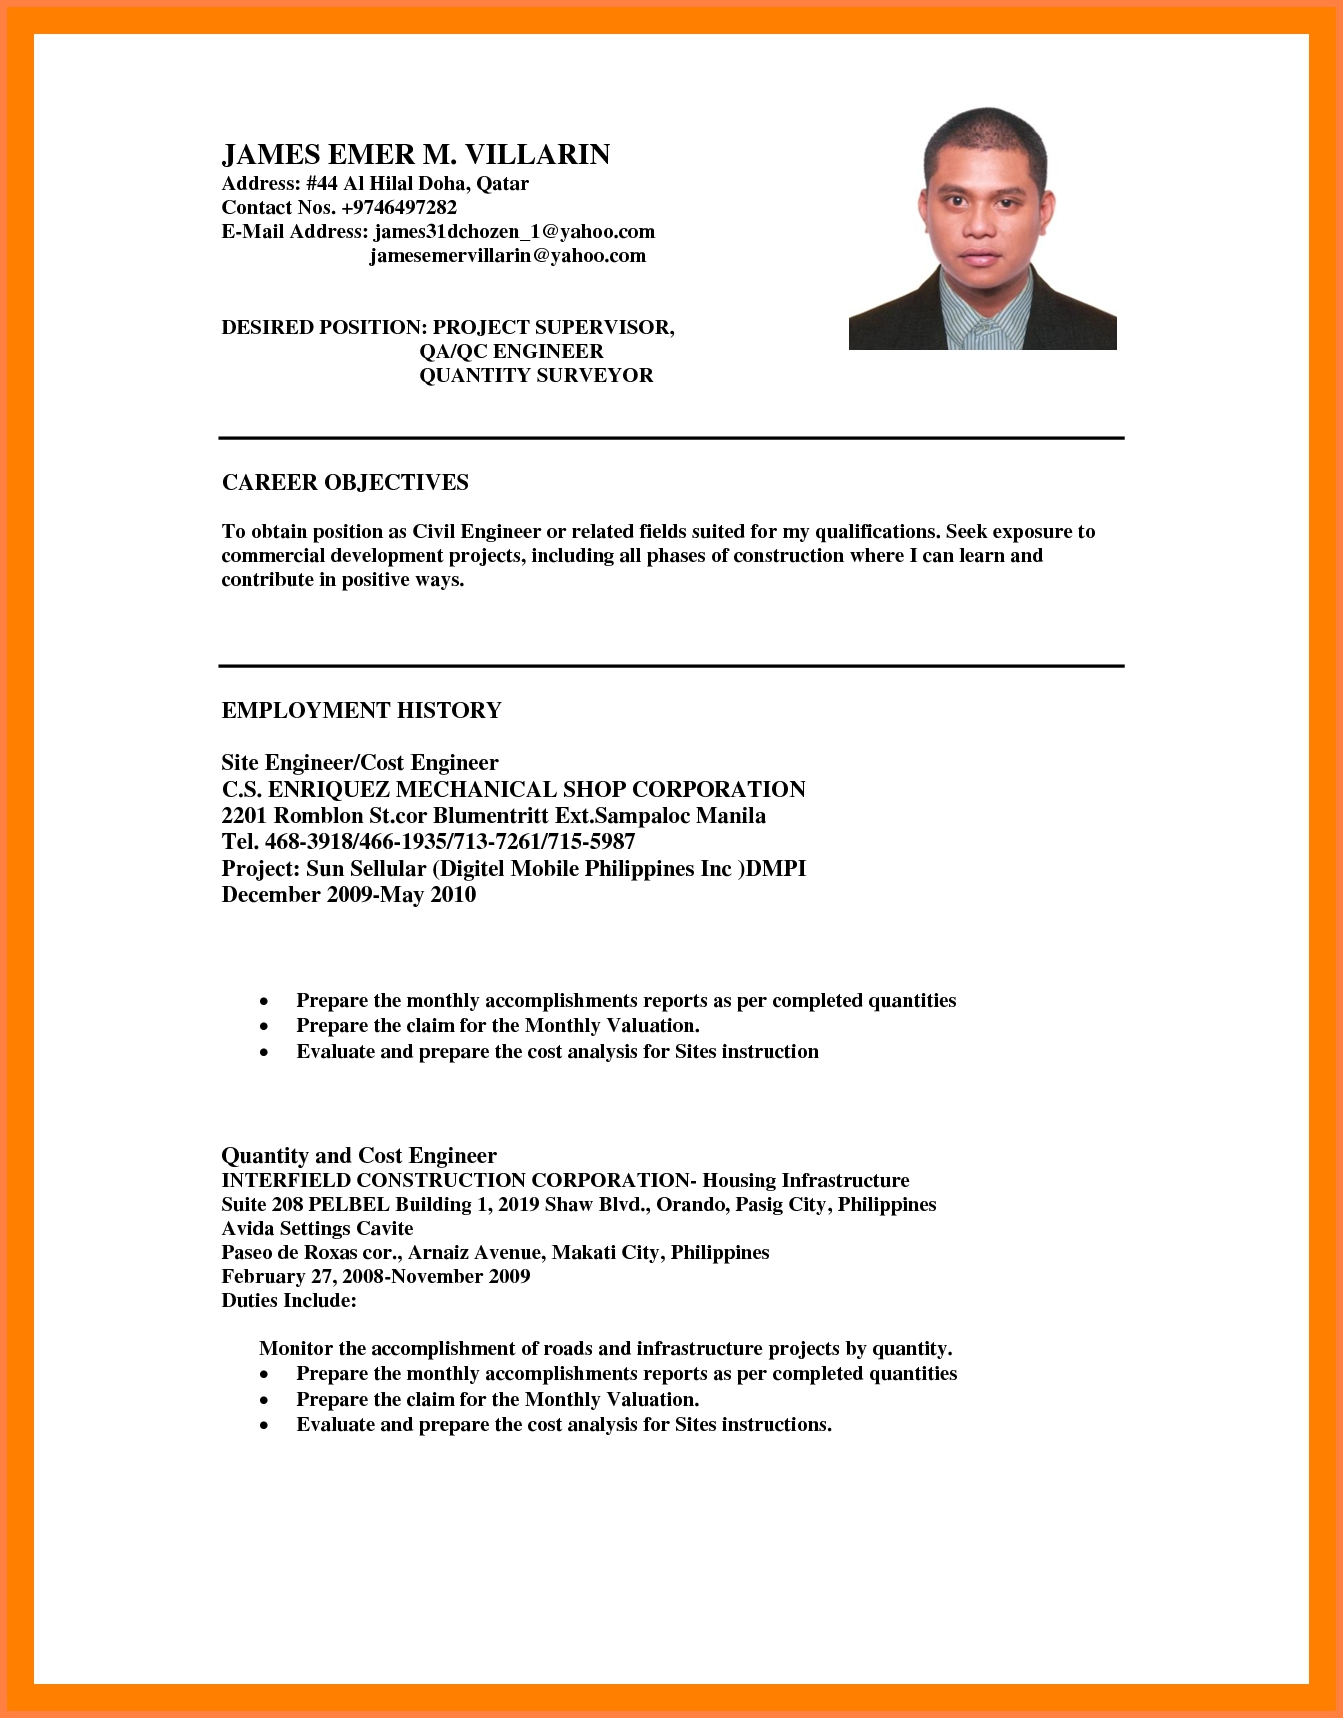 Resume Tips Objective Resume Templates Good Career Examples Marketing For Students Best